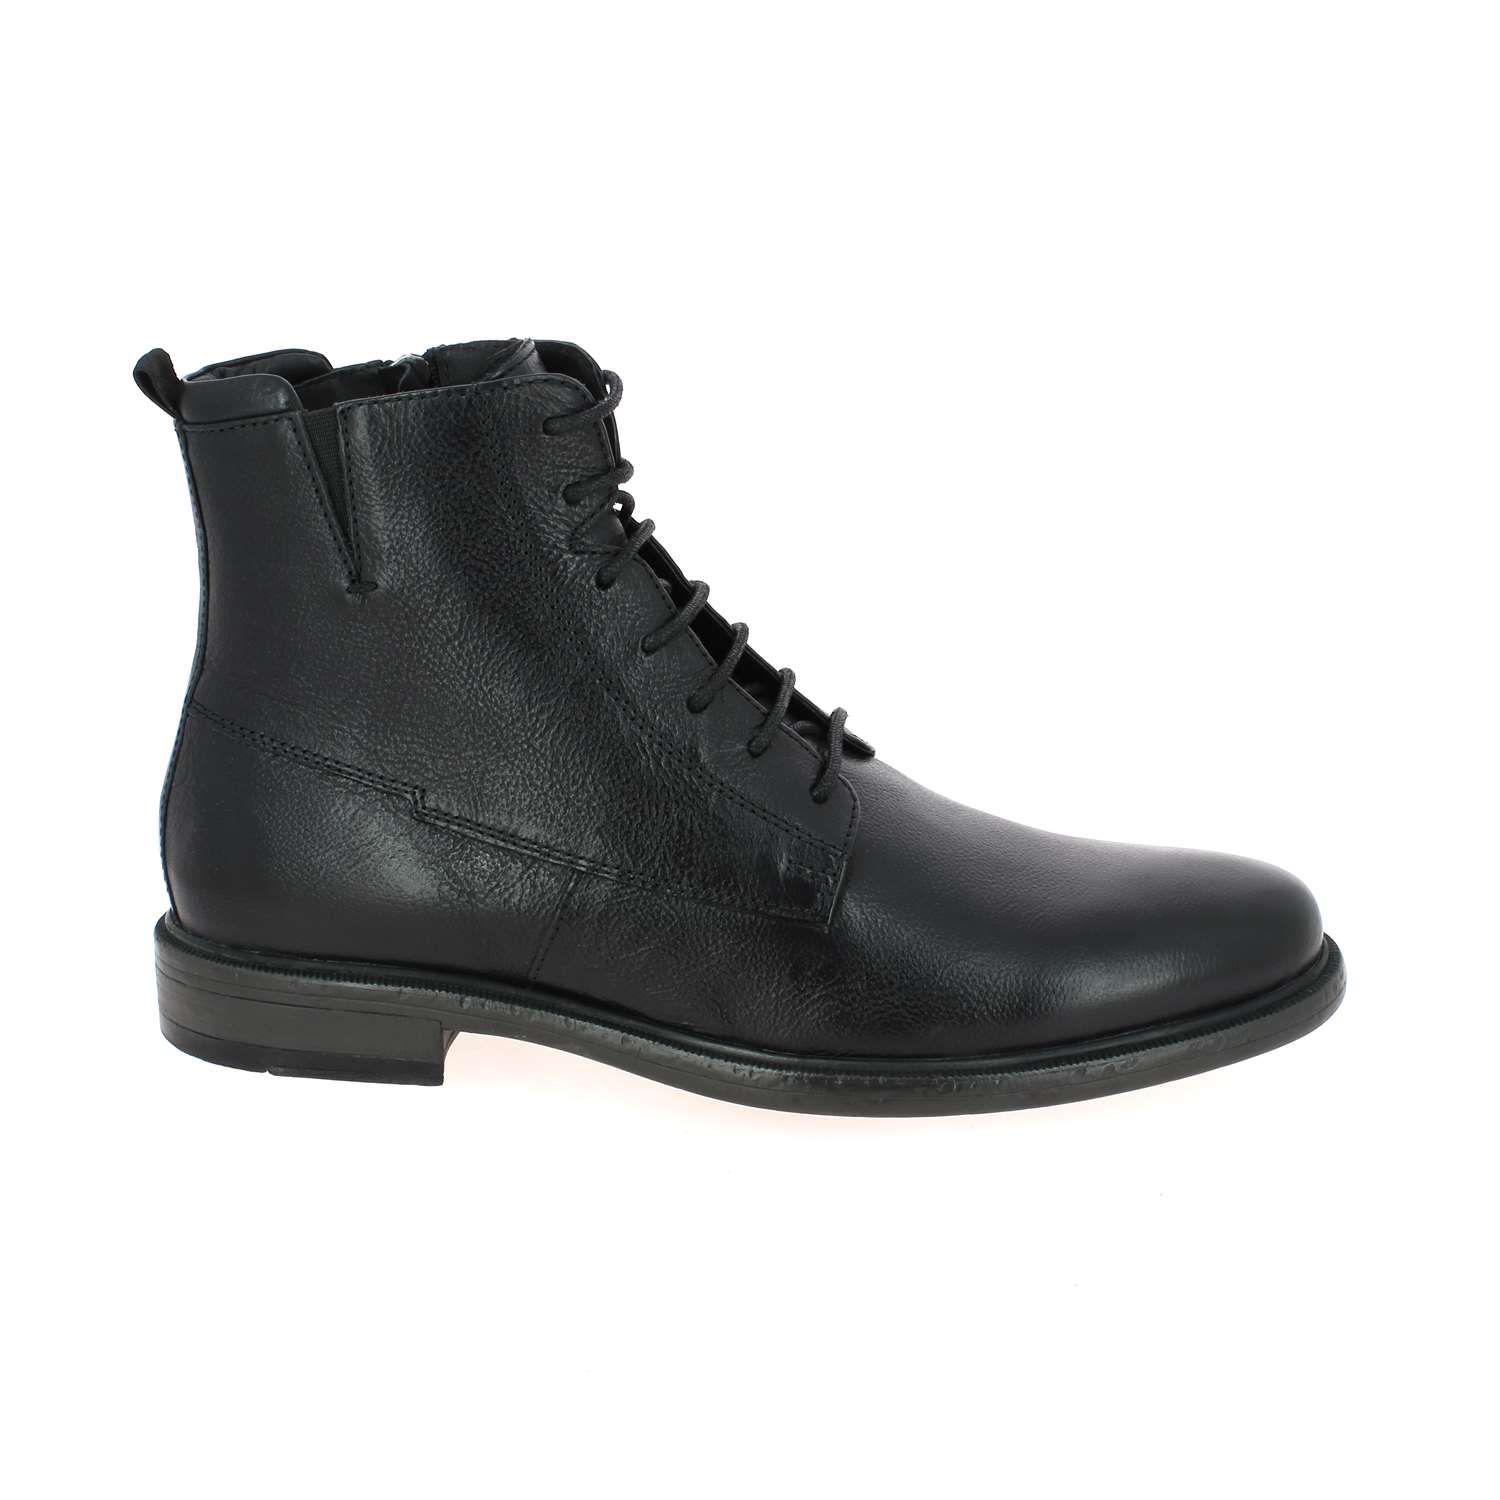 02 - TERENCE HI - GEOX - Boots et bottines - Cuir